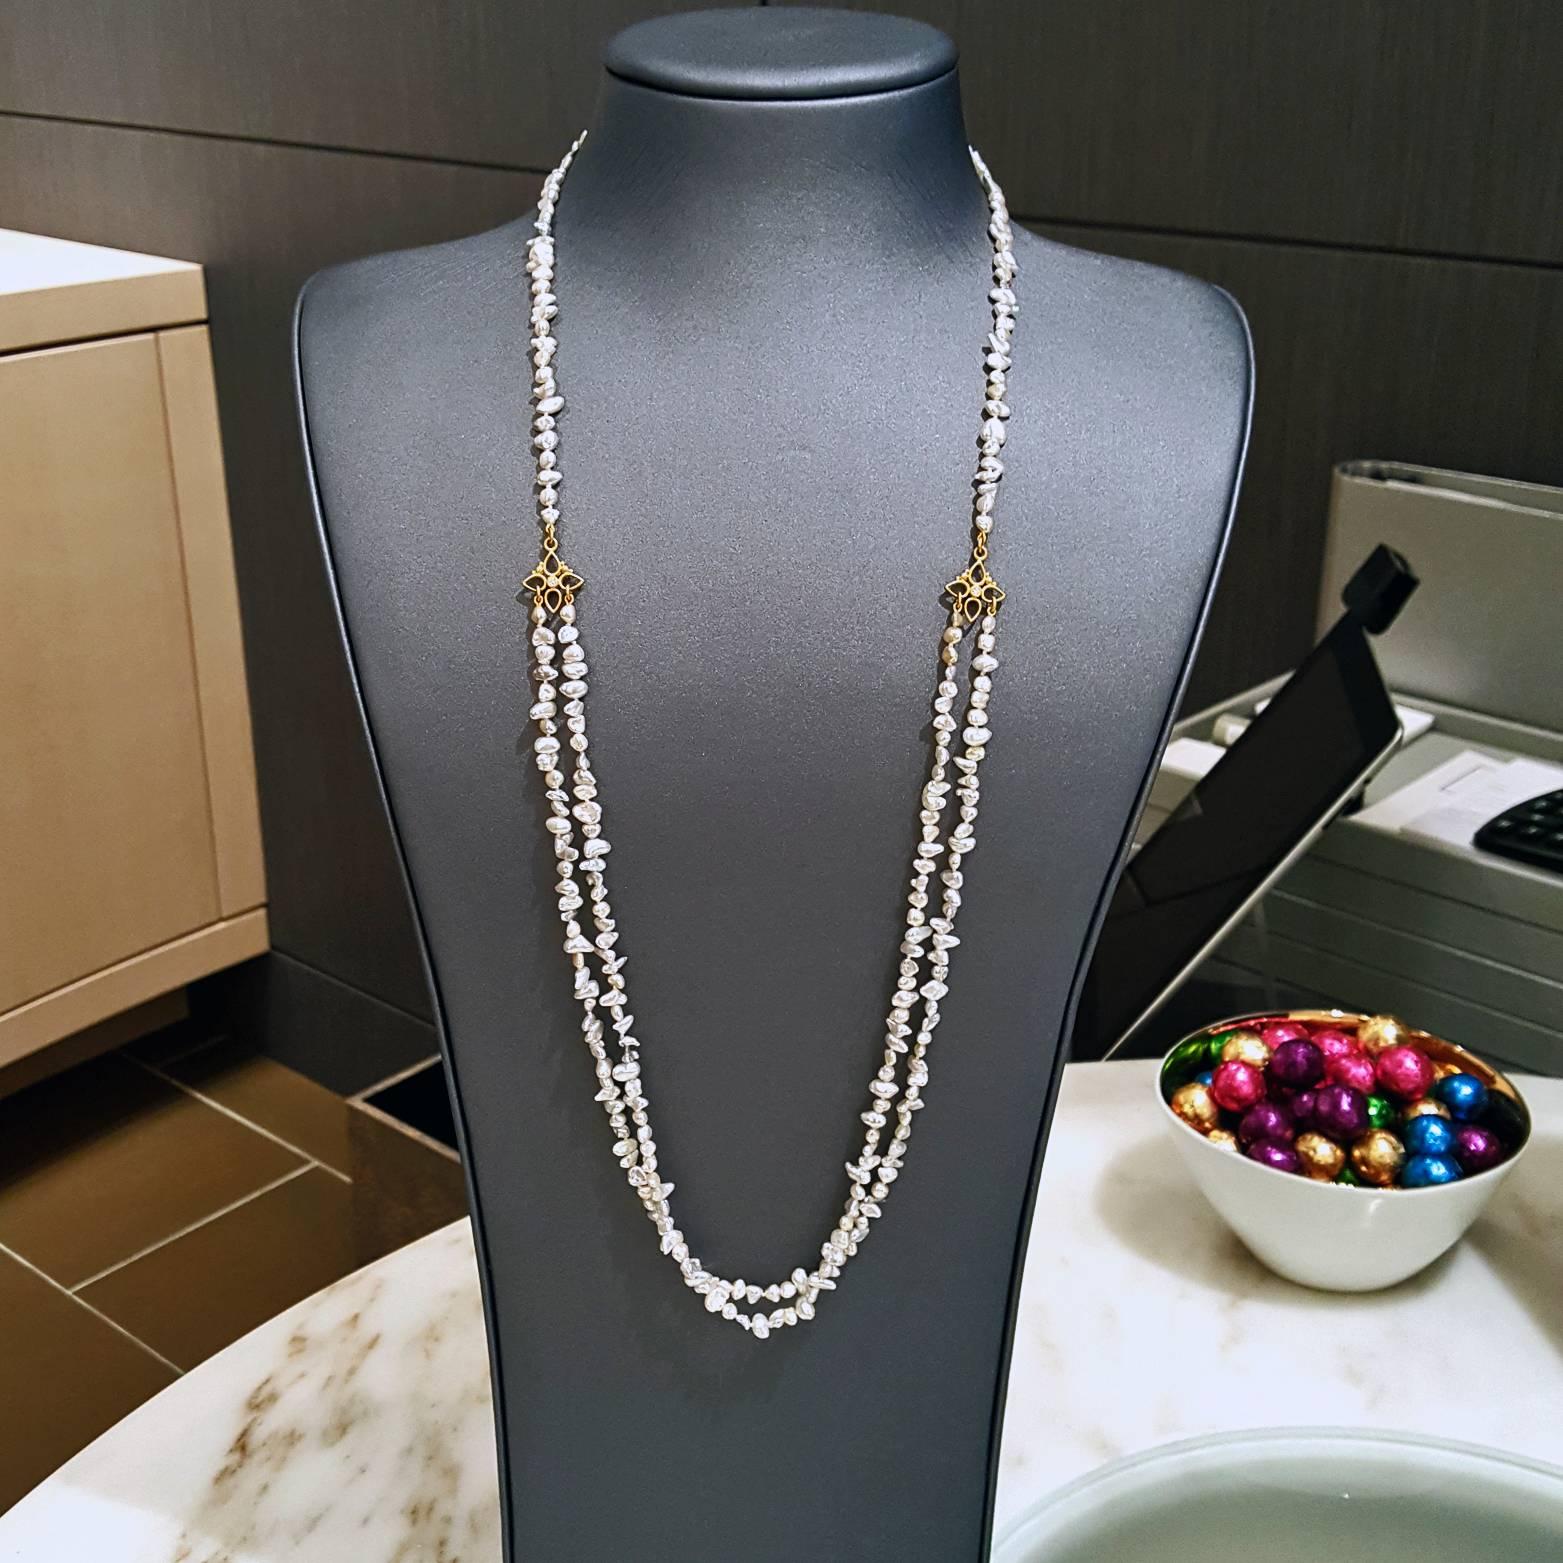 One-of-a-Kind 36" Double Strand Necklace with mixed blue and silver-toned Keshi pearls and complemented by two handmade 22k yellow gold cottonwood stations showcasing 0.06 total carats of round, brilliant-cut white diamonds.